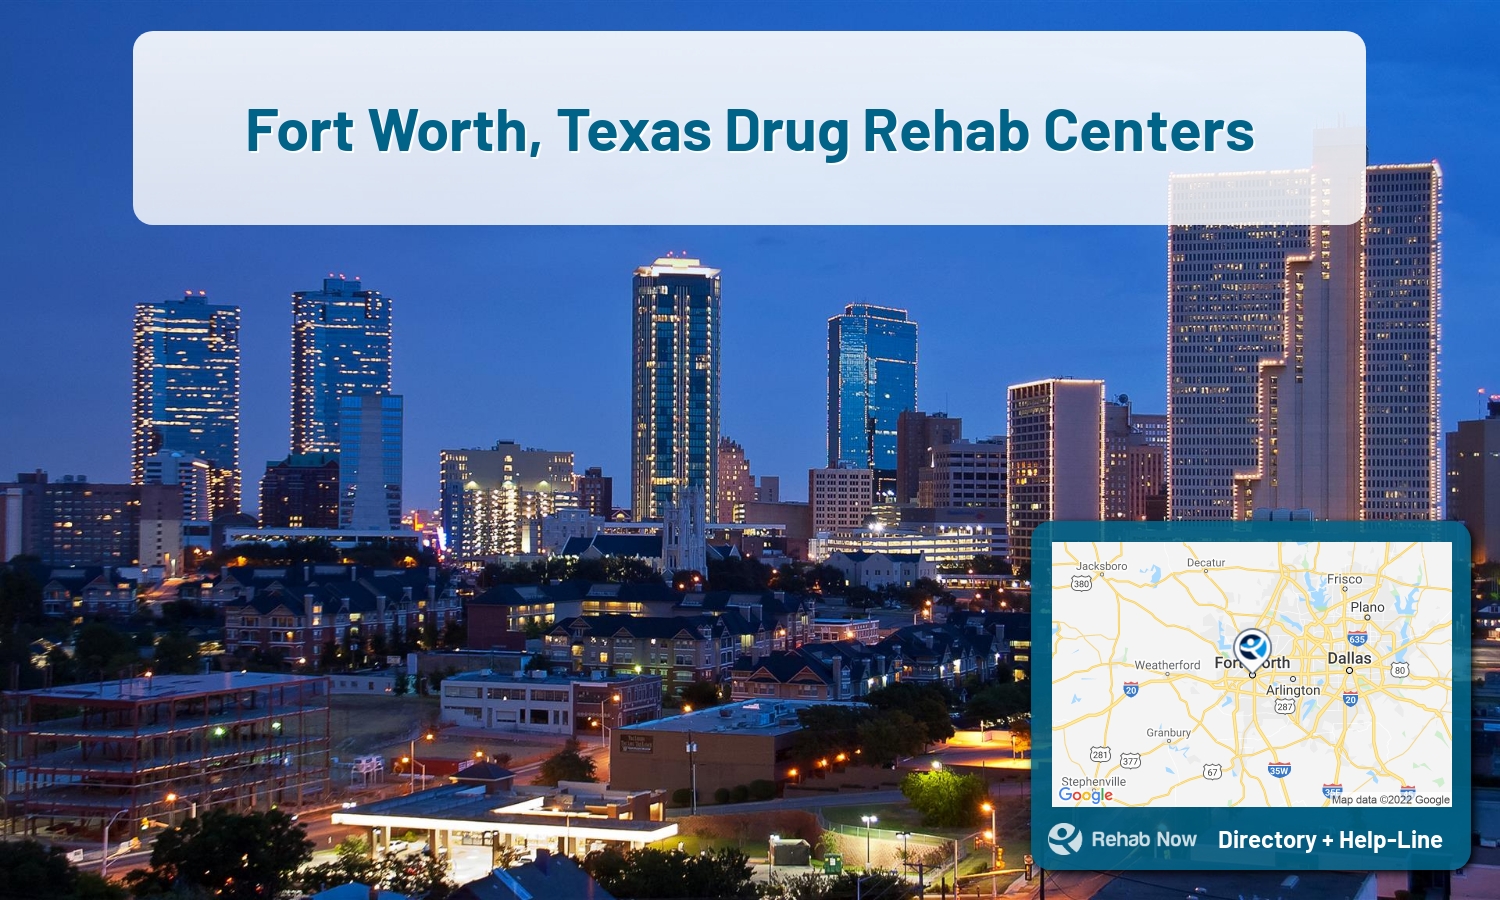 Fort Worth, TX Treatment Centers. Find drug rehab in Fort Worth, Texas, or detox and treatment programs. Get the right help now!